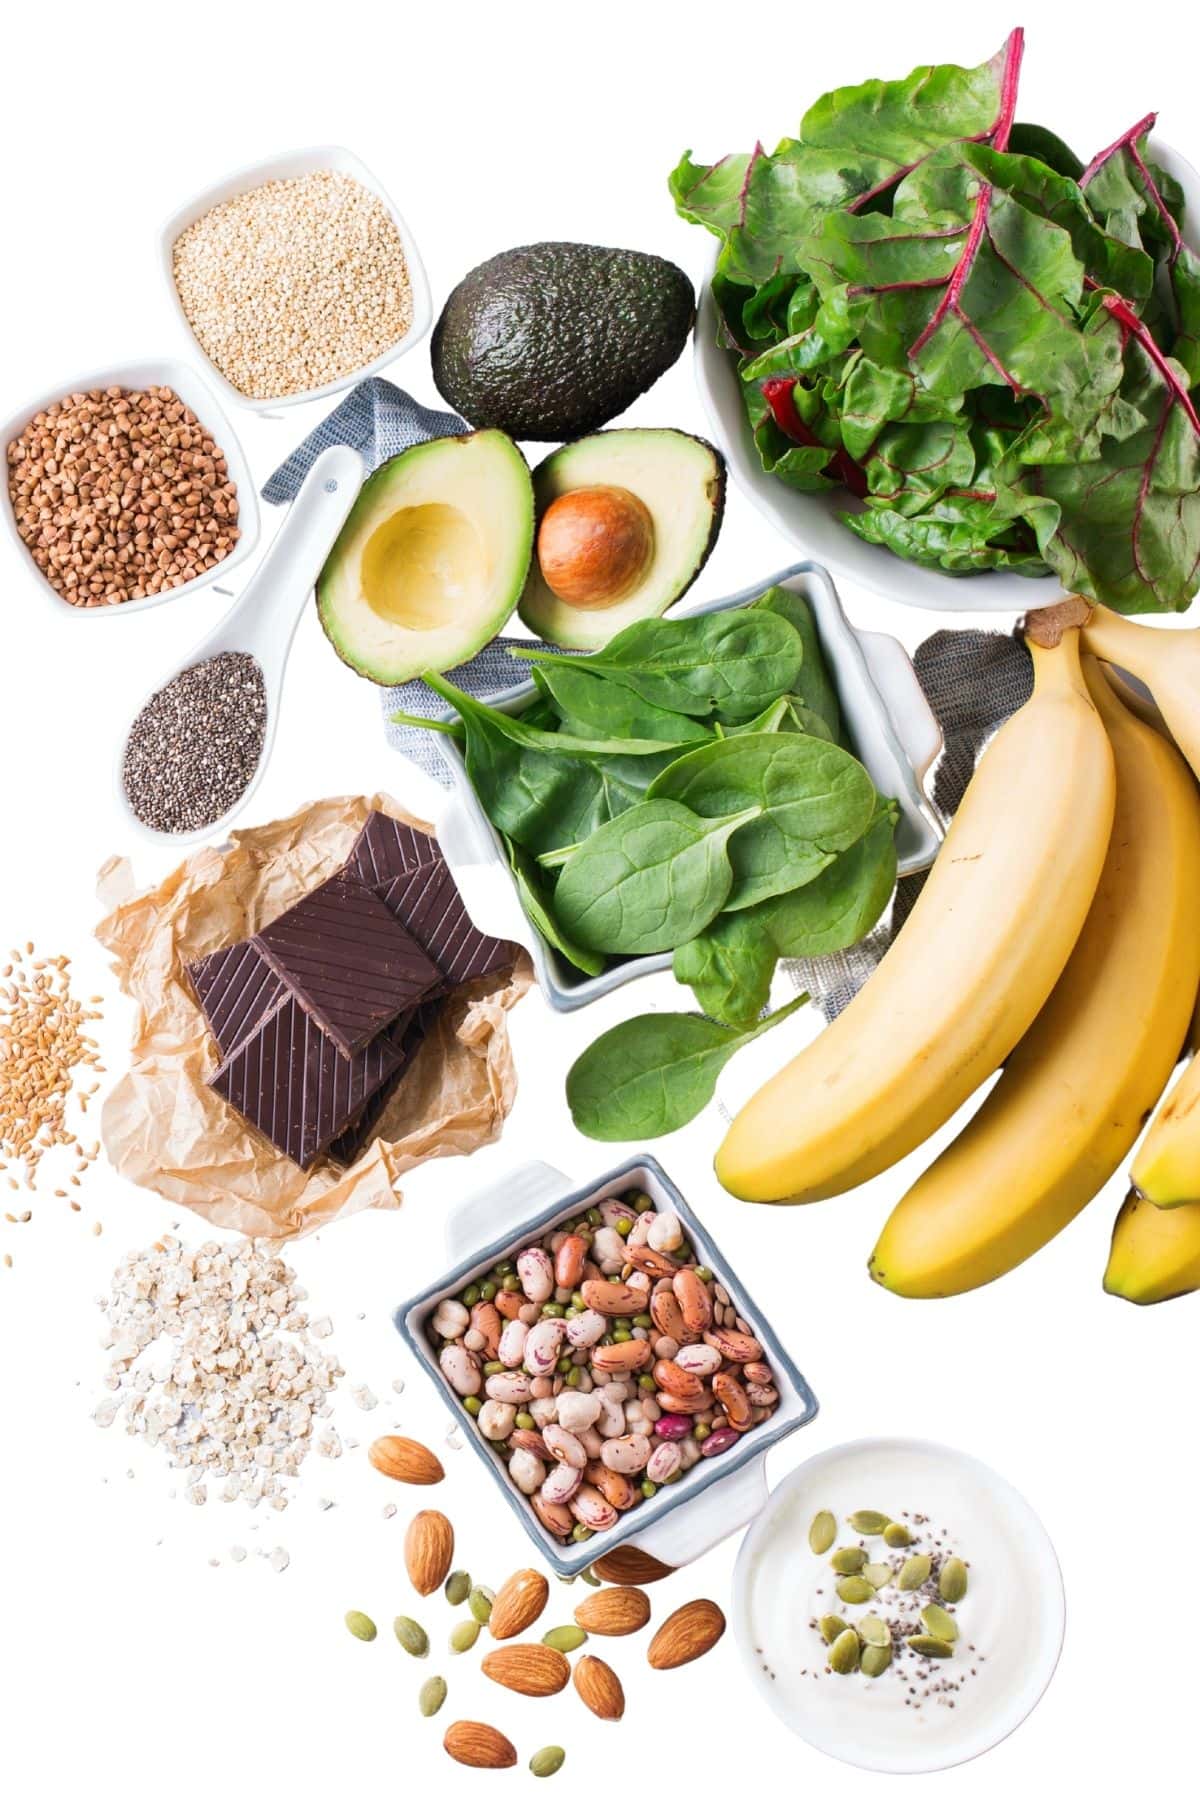 Photo of foods high in magnesium including spinach, Swiss chard, pumpkin seeds, quinoa, chia seeds, avocado, almonds, dark chocolate, bananas, and beans.